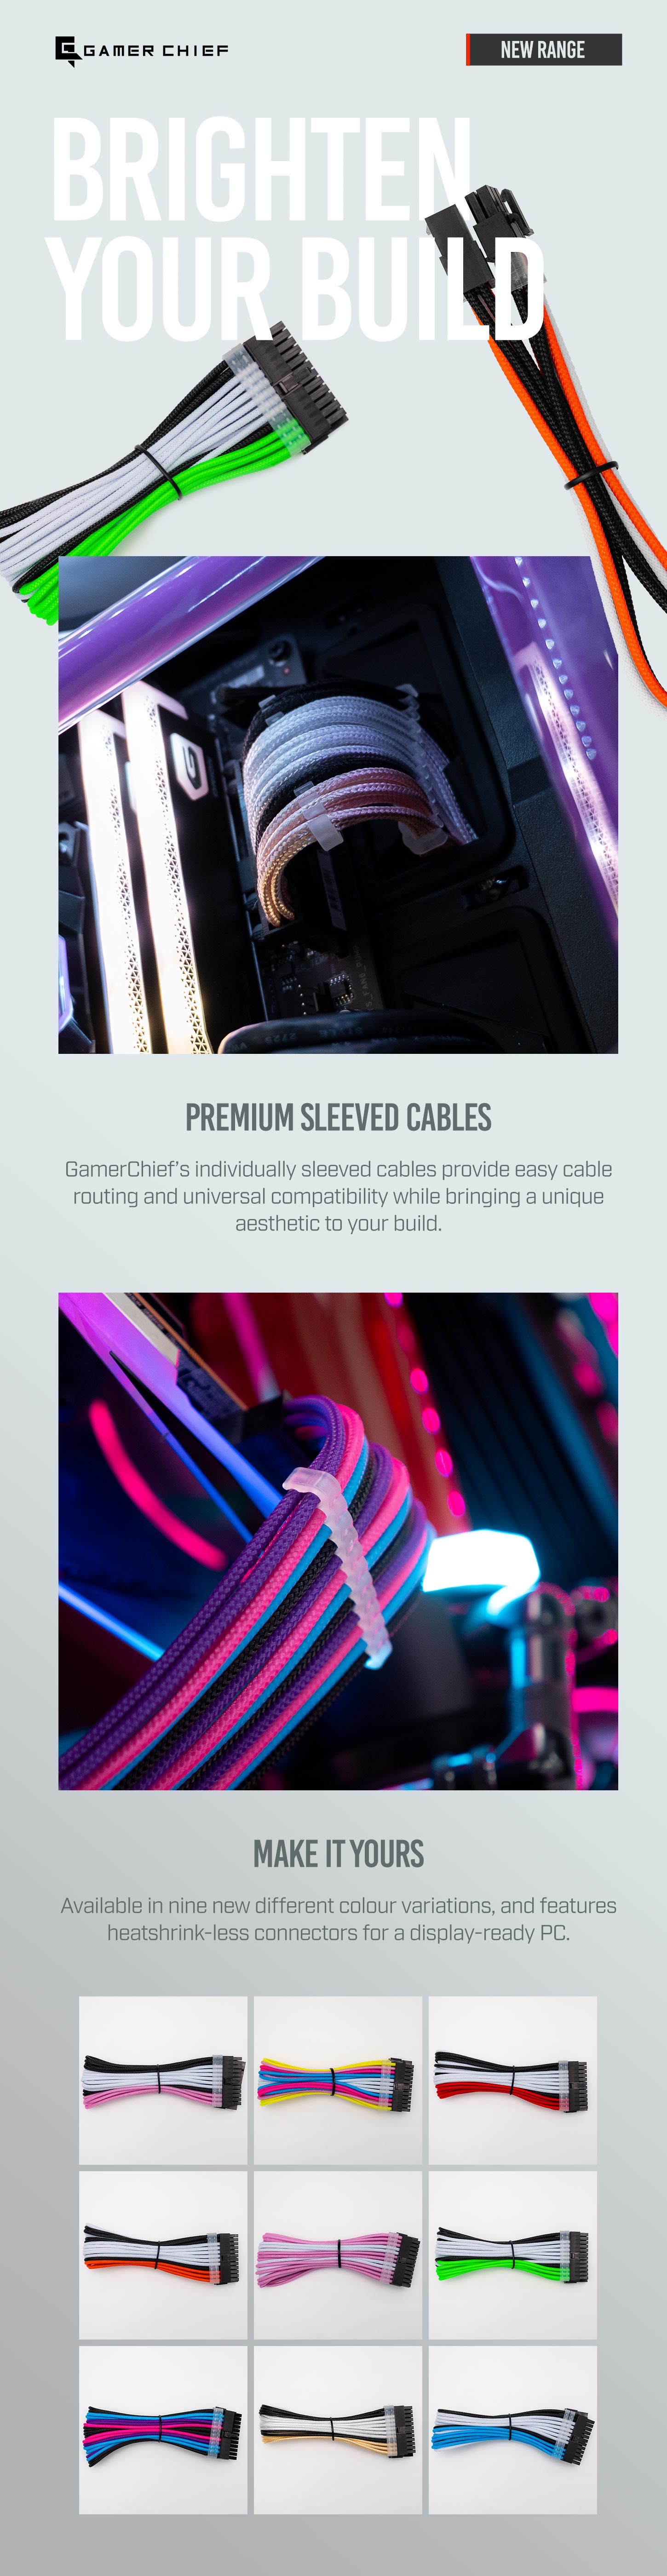 A large marketing image providing additional information about the product GamerChief Elite Series 6-Pin PCIe 30cm Sleeved Extension Cable (Green/White/Black) - Additional alt info not provided